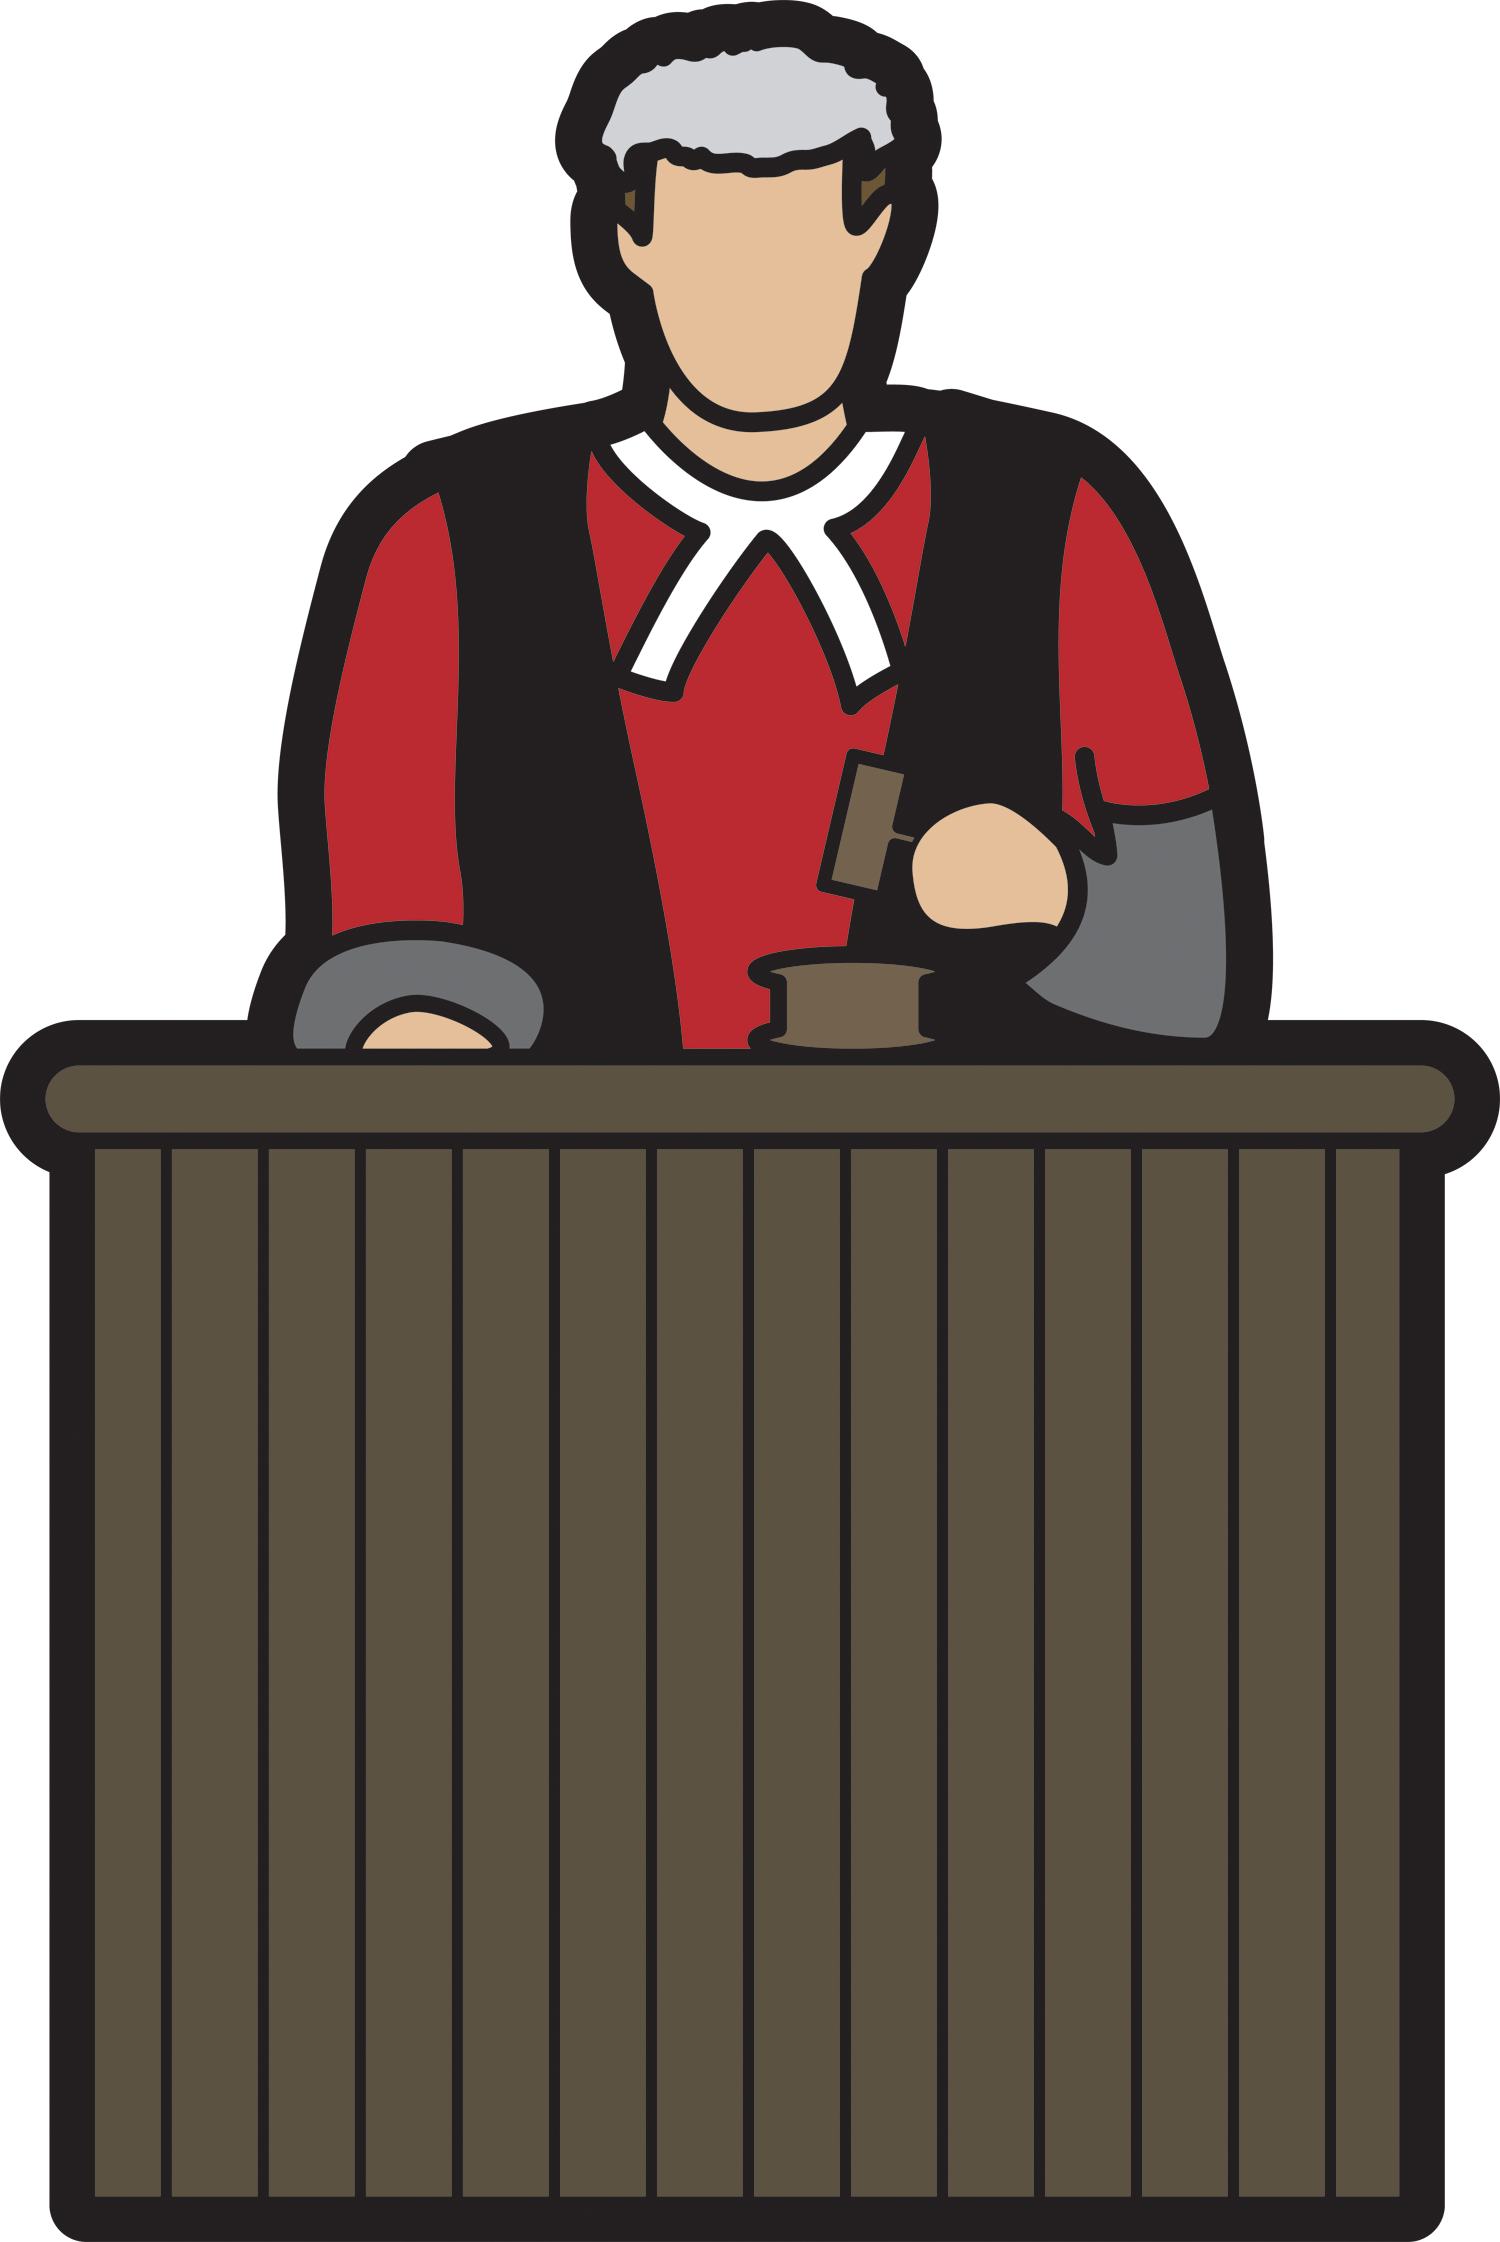 free clipart of judge - photo #15